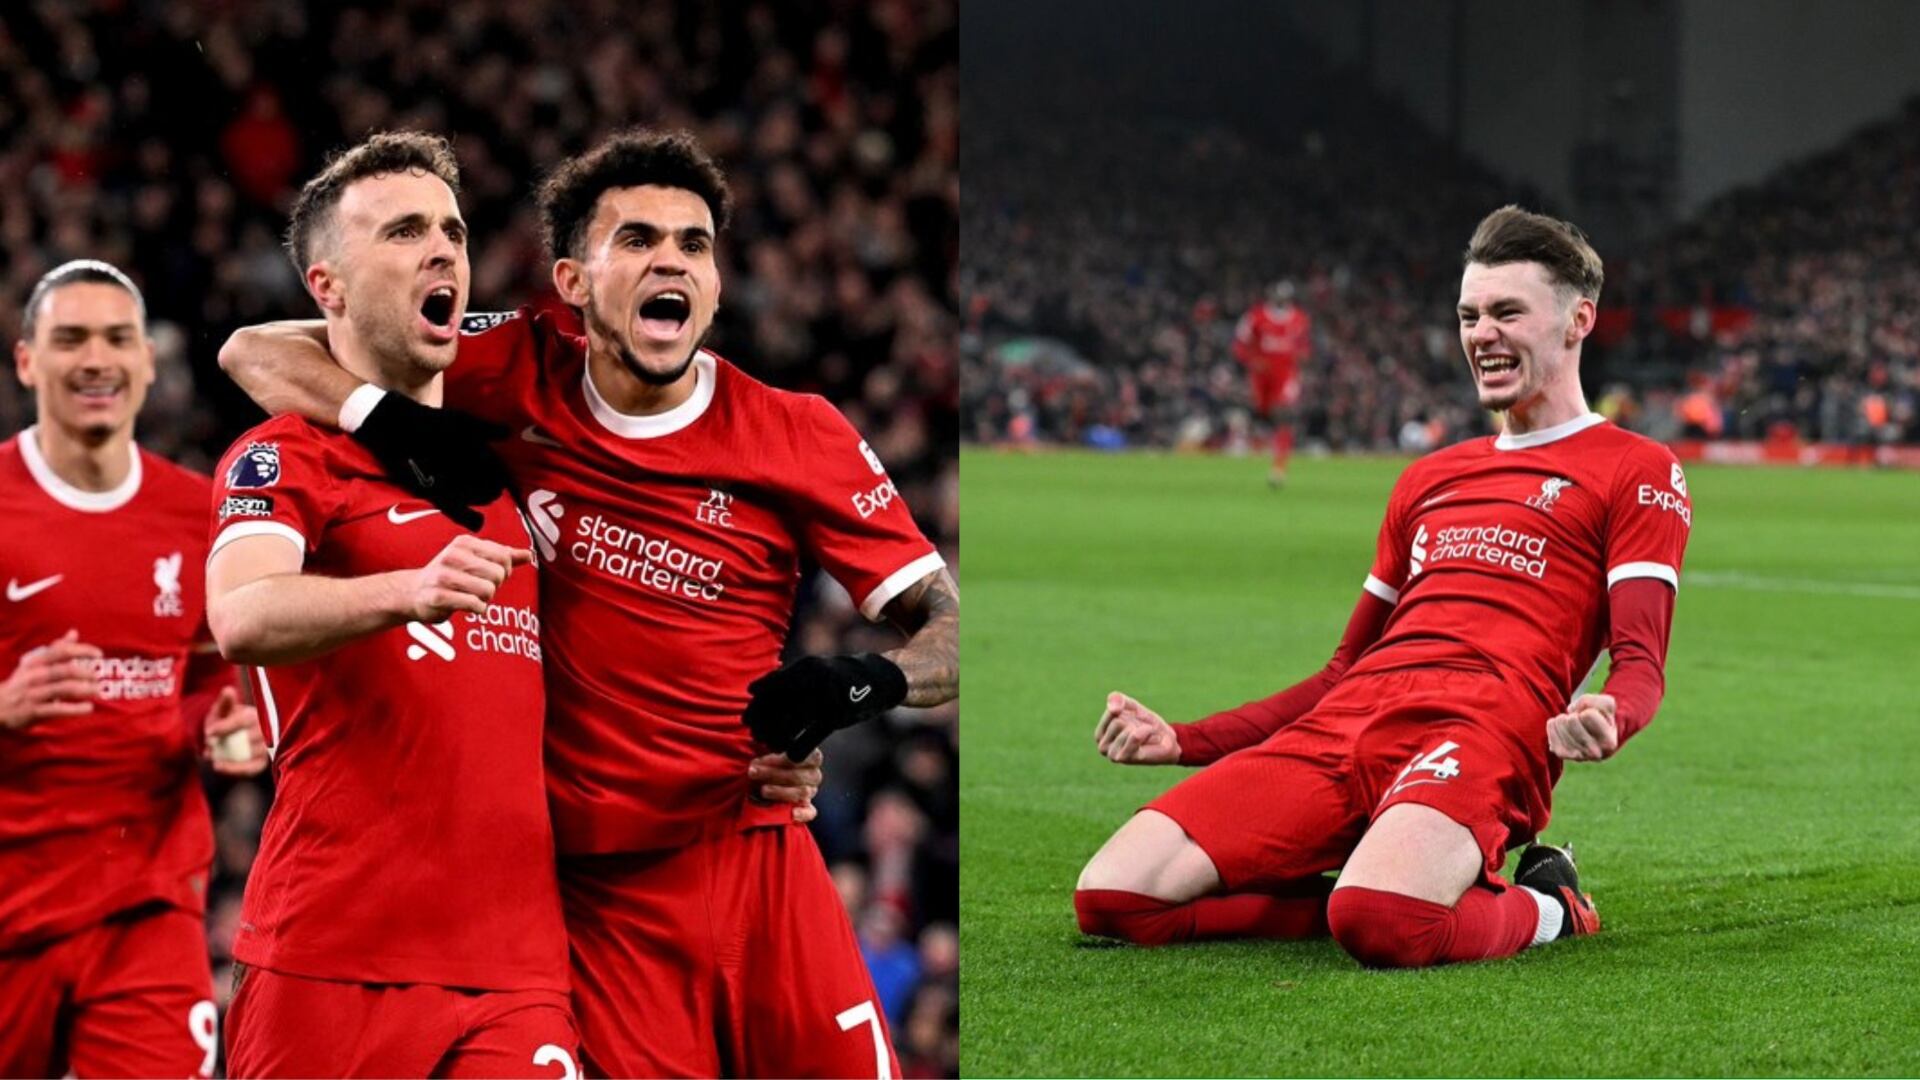 Liverpool smashes Chelsea 4-1 at Anfield and continue as league leaders 